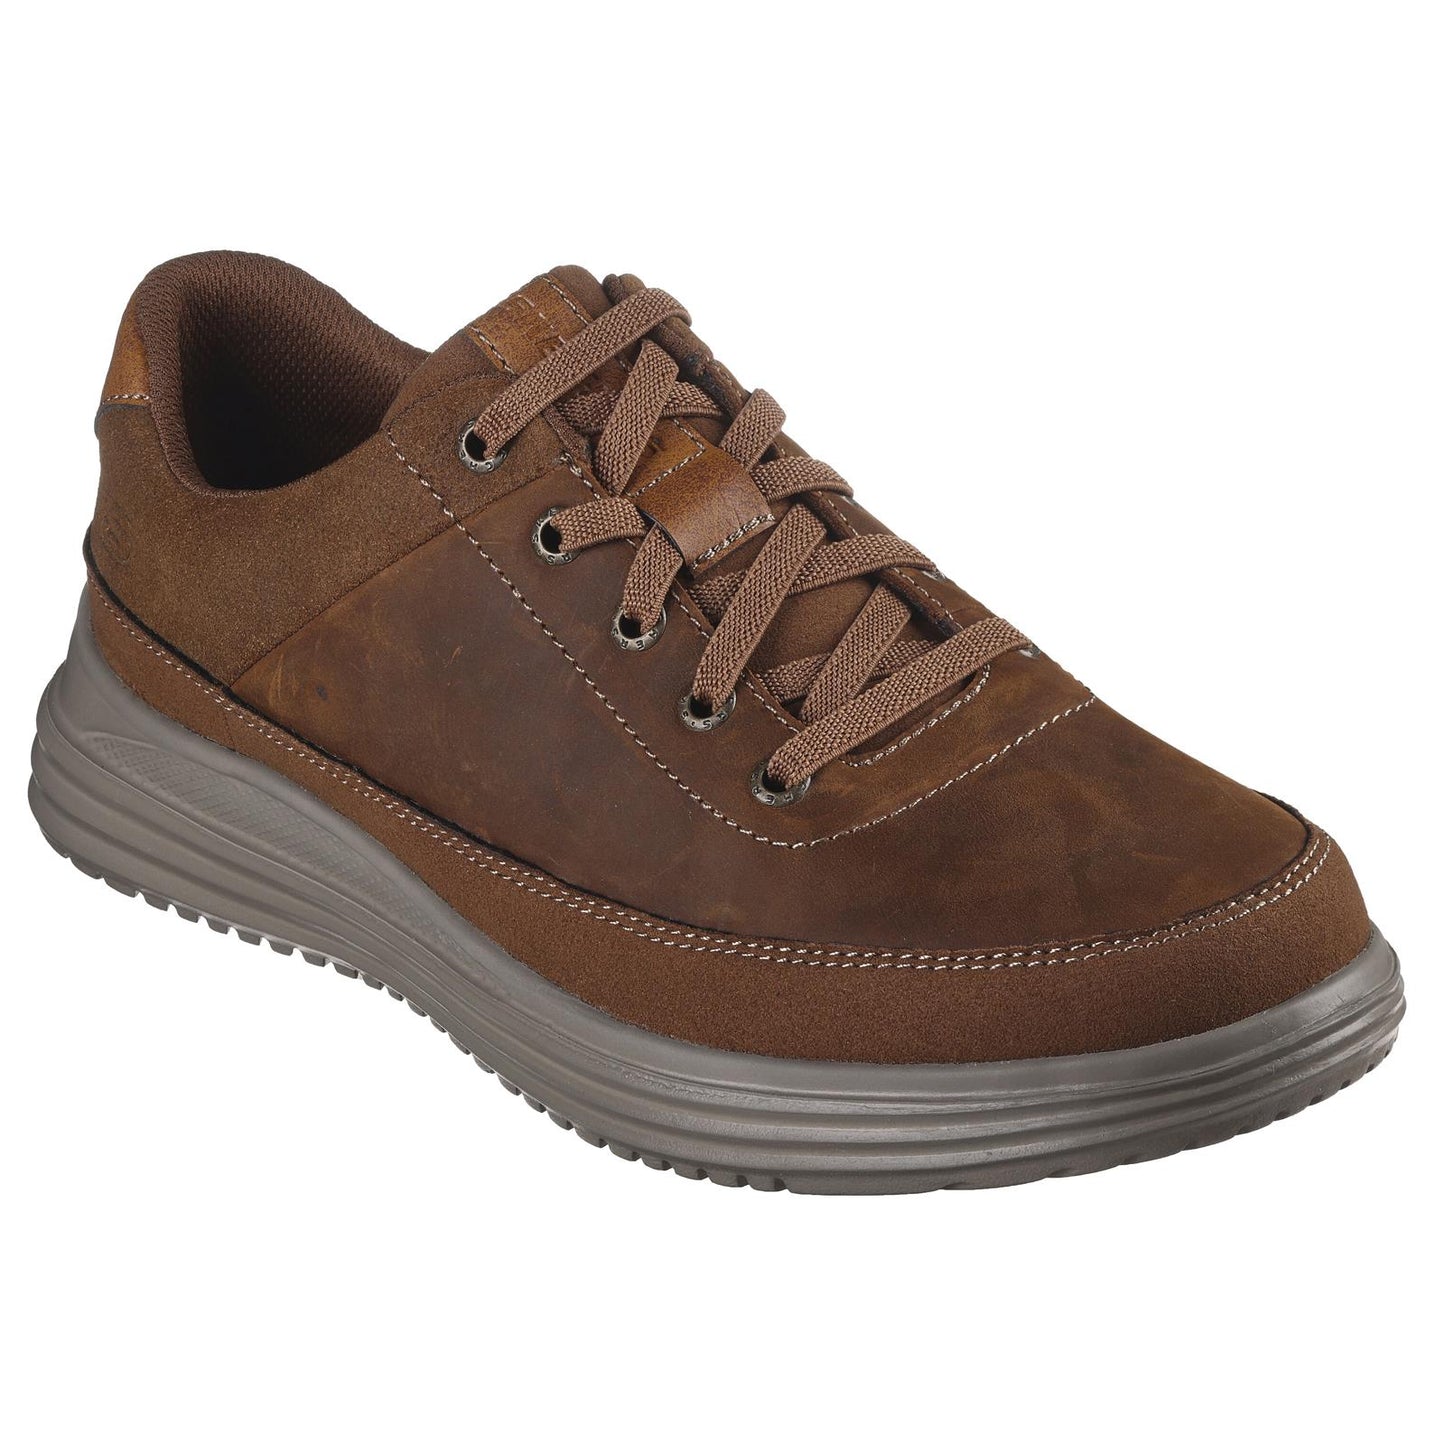 Skechers Mens Proven Aldeno Dark Brown Casual Lace Up Shoes